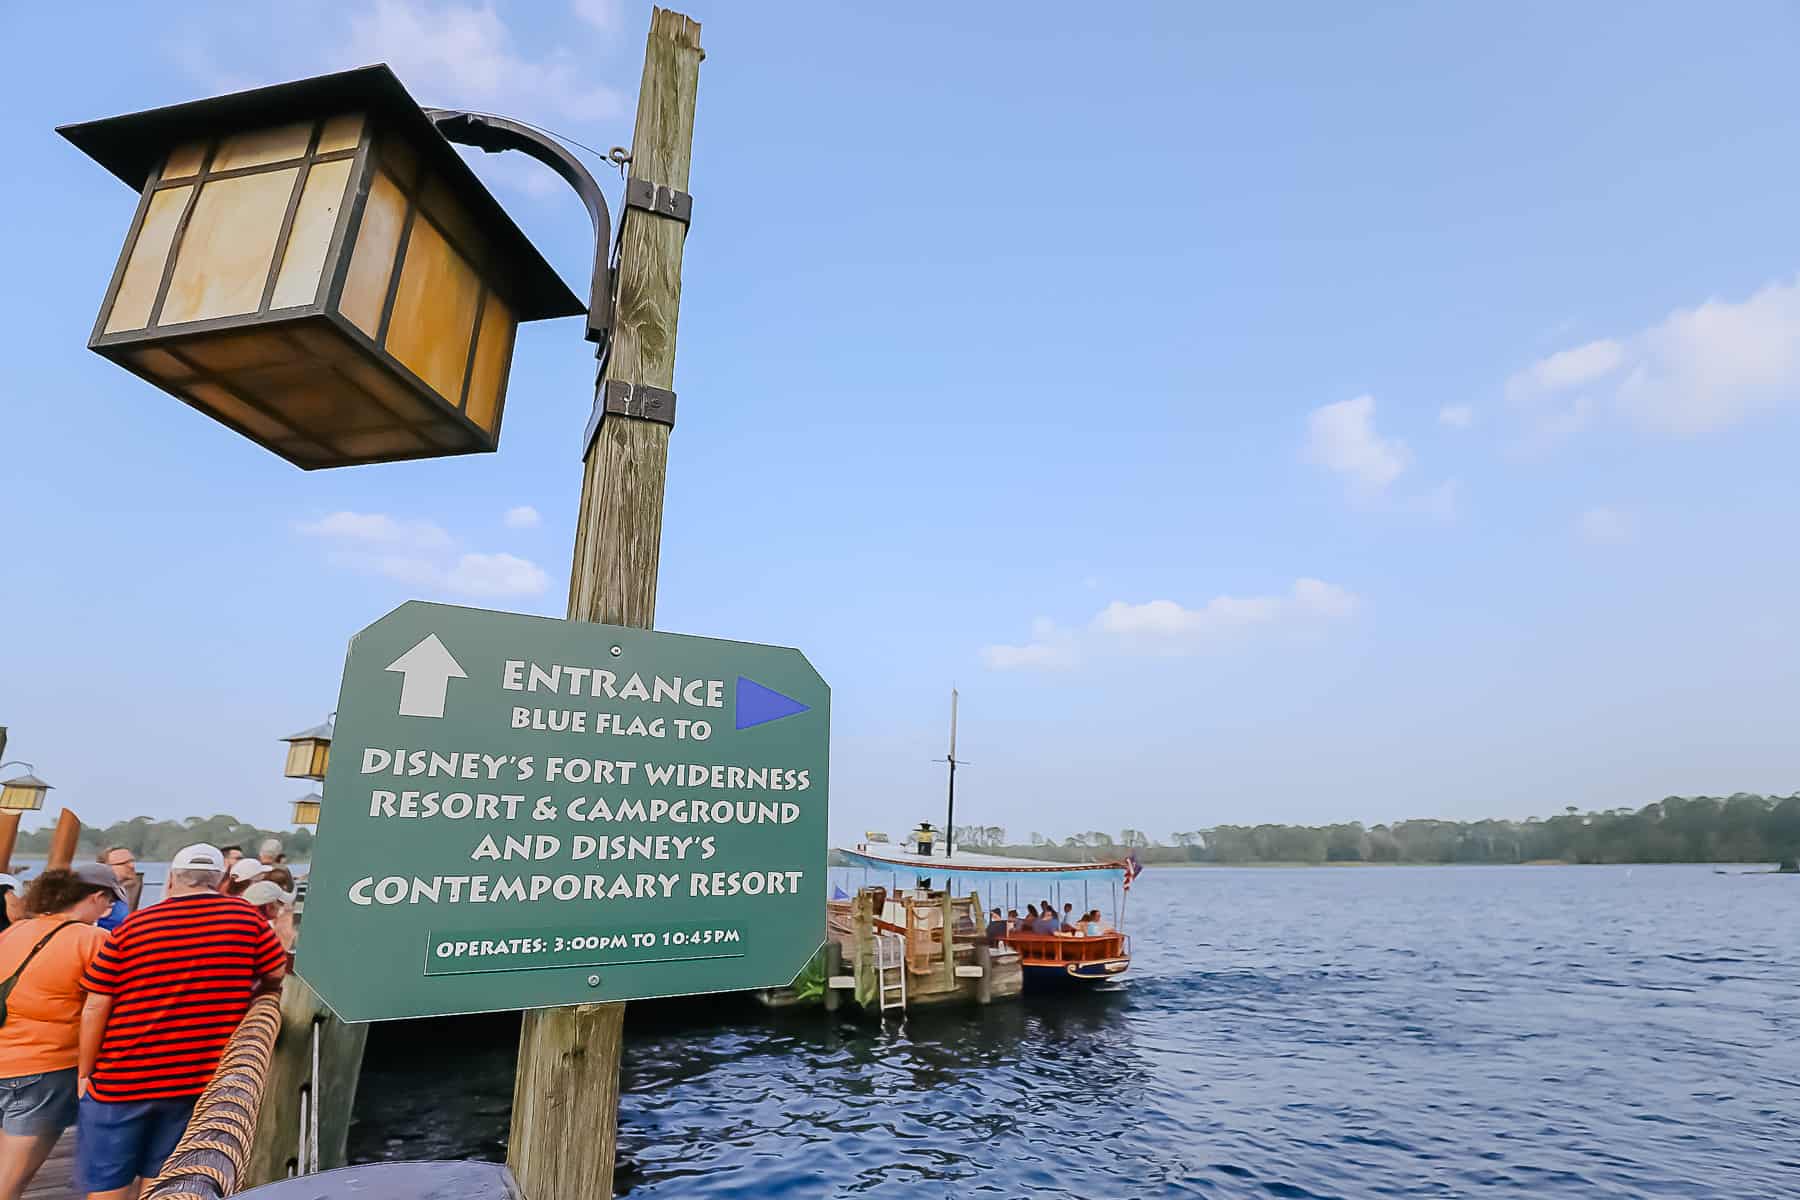 Blue flag boat launch from Wilderness Lodge to Fort Wilderness